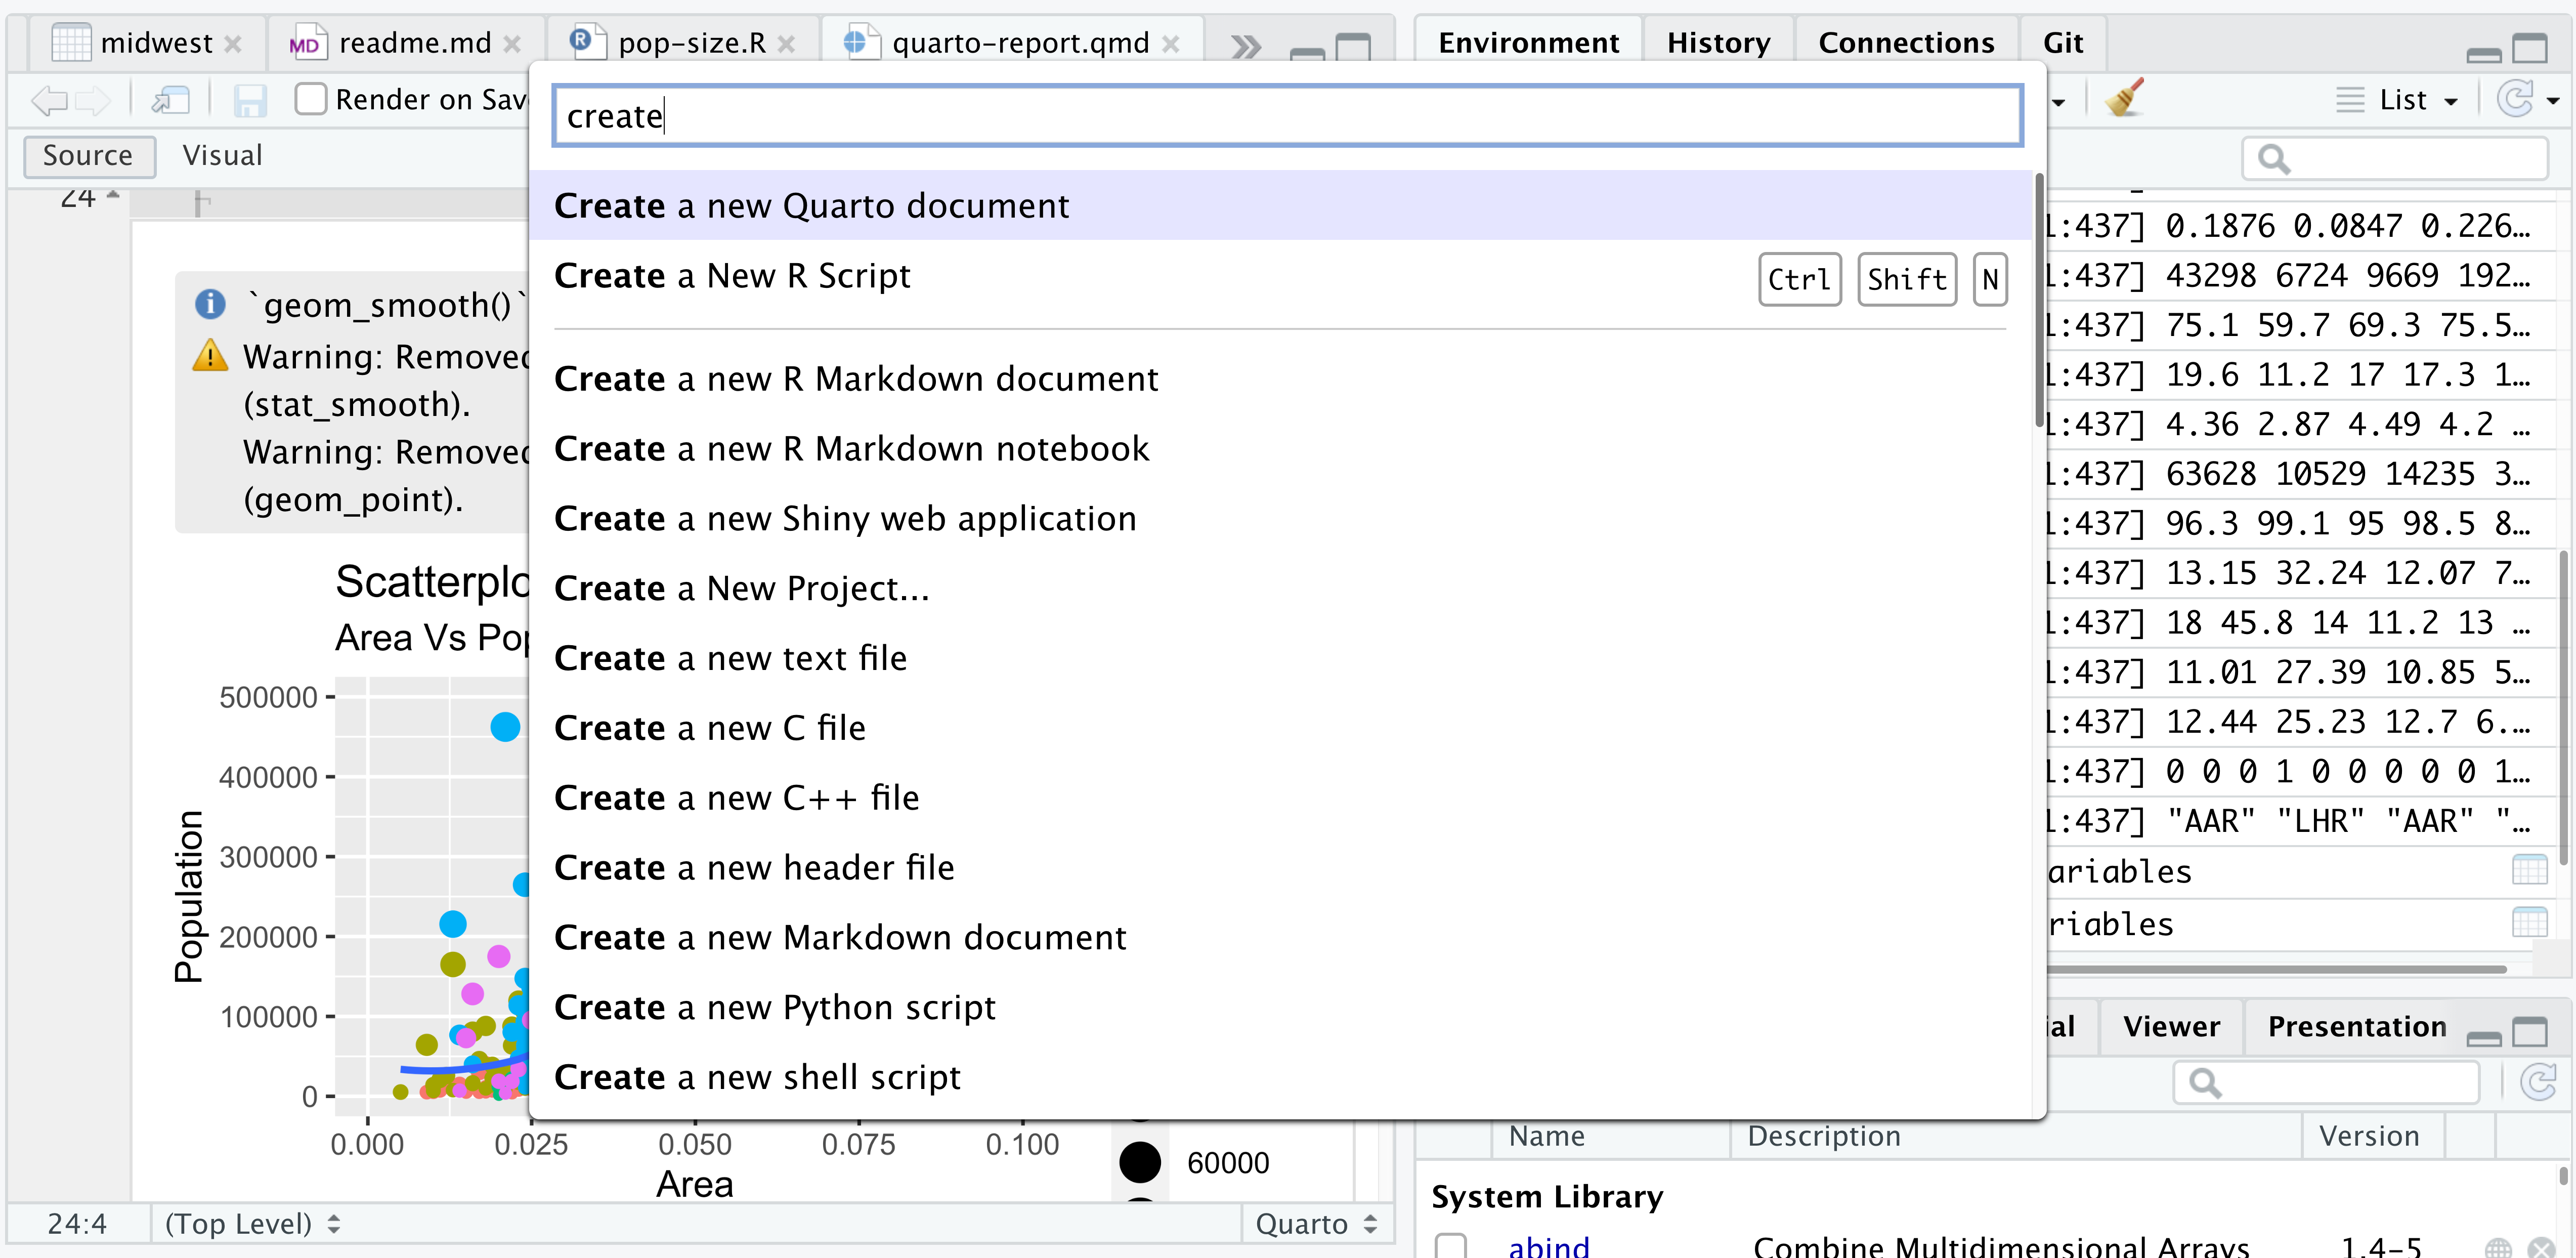 A screenshot of the Command Palette in use, which provides a search bar for all available RStudio shortcuts.